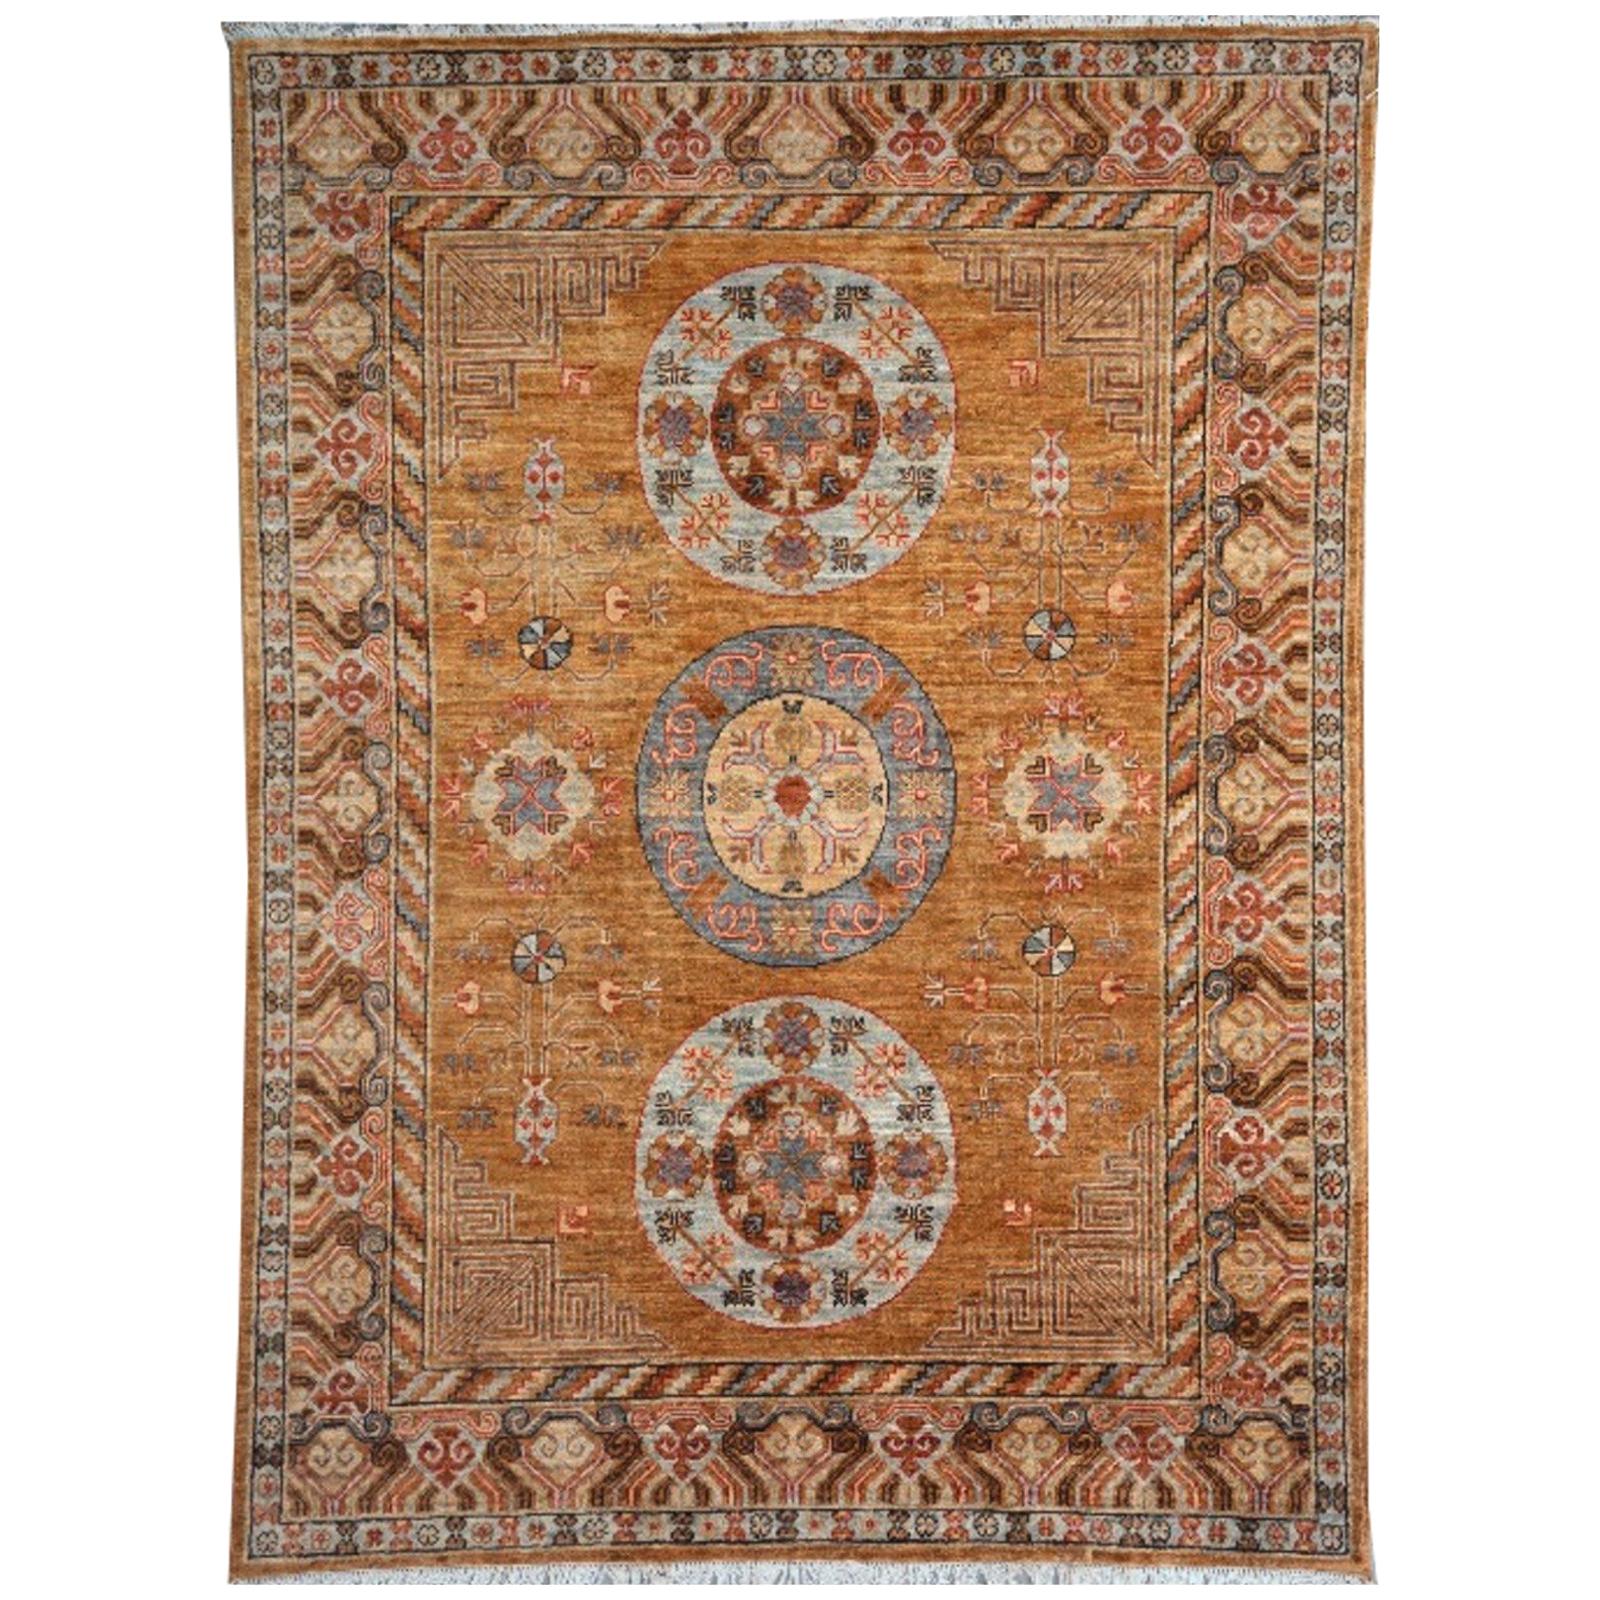 Khotan Style Rug Hand Knotted Contemporary Camel Colored Wool Area Carpet